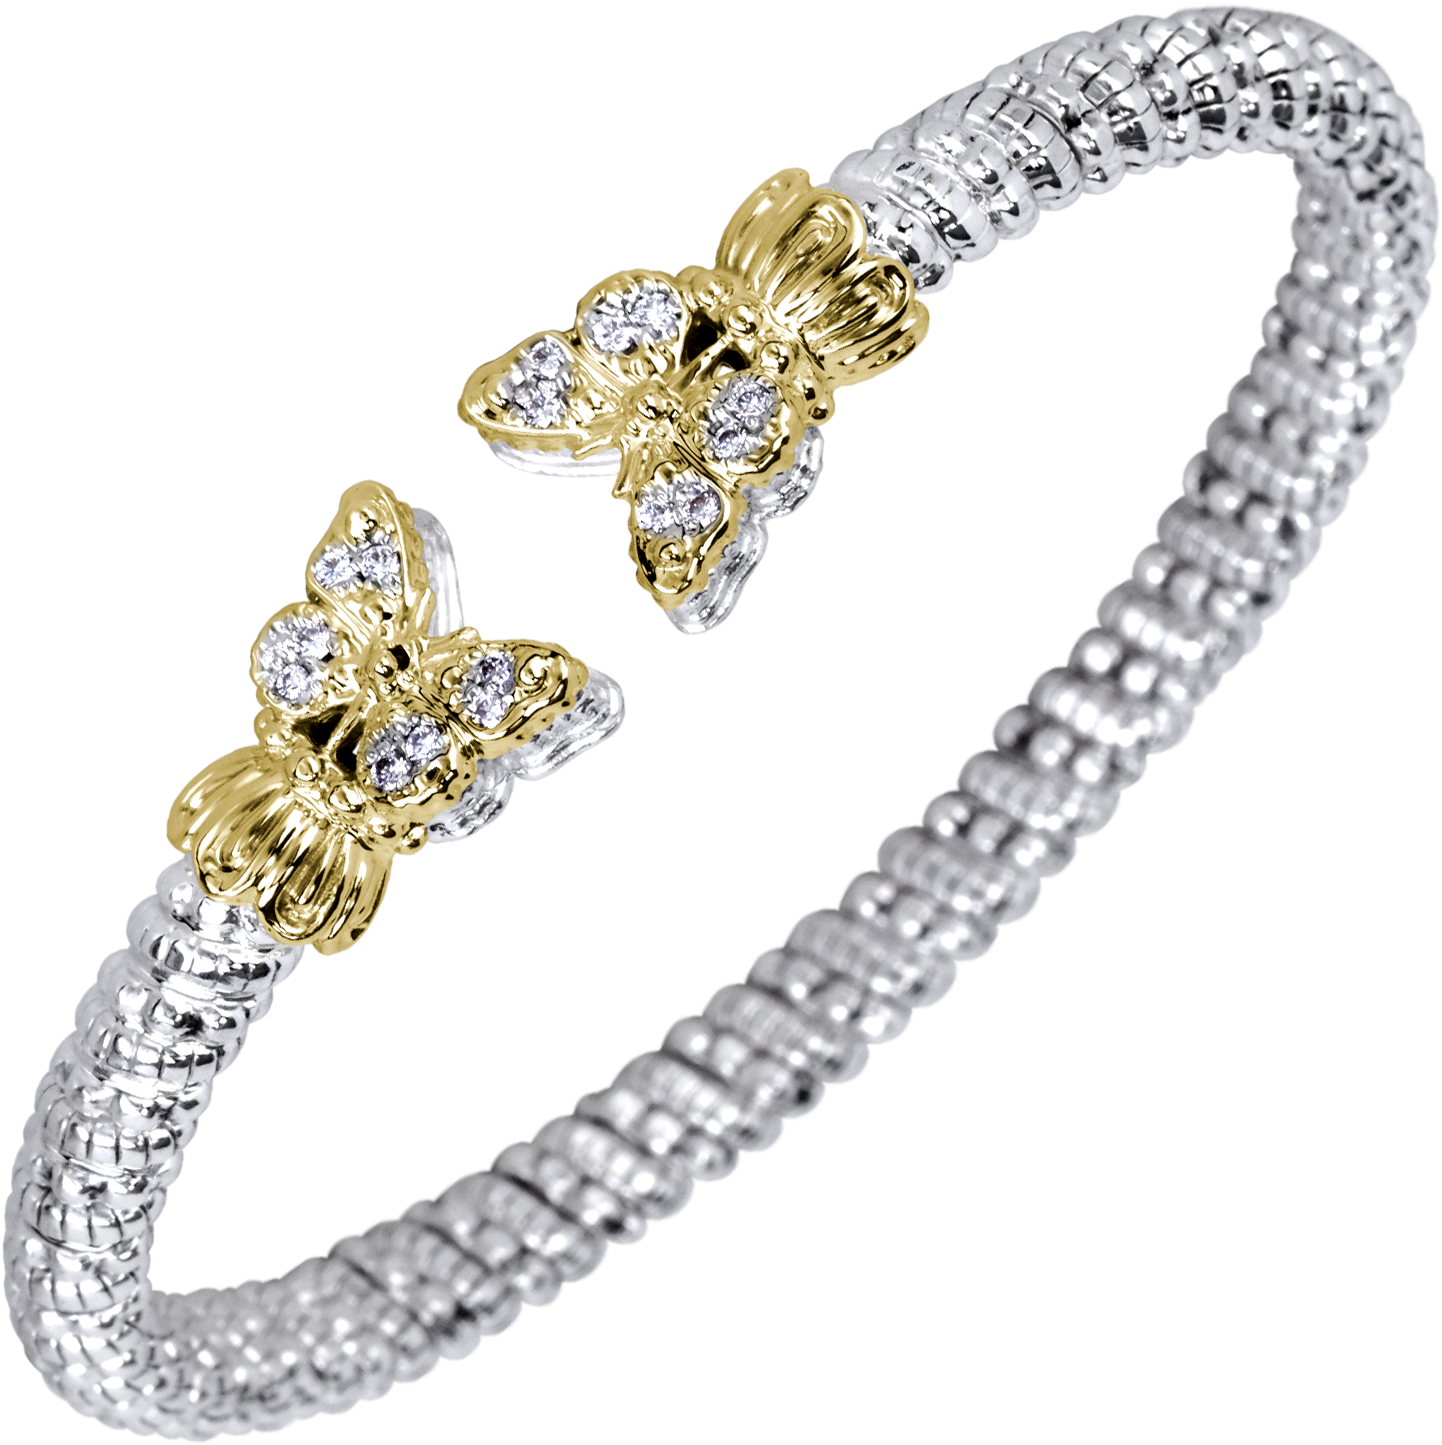 A Silver And Gold Bracelet With Diamonds